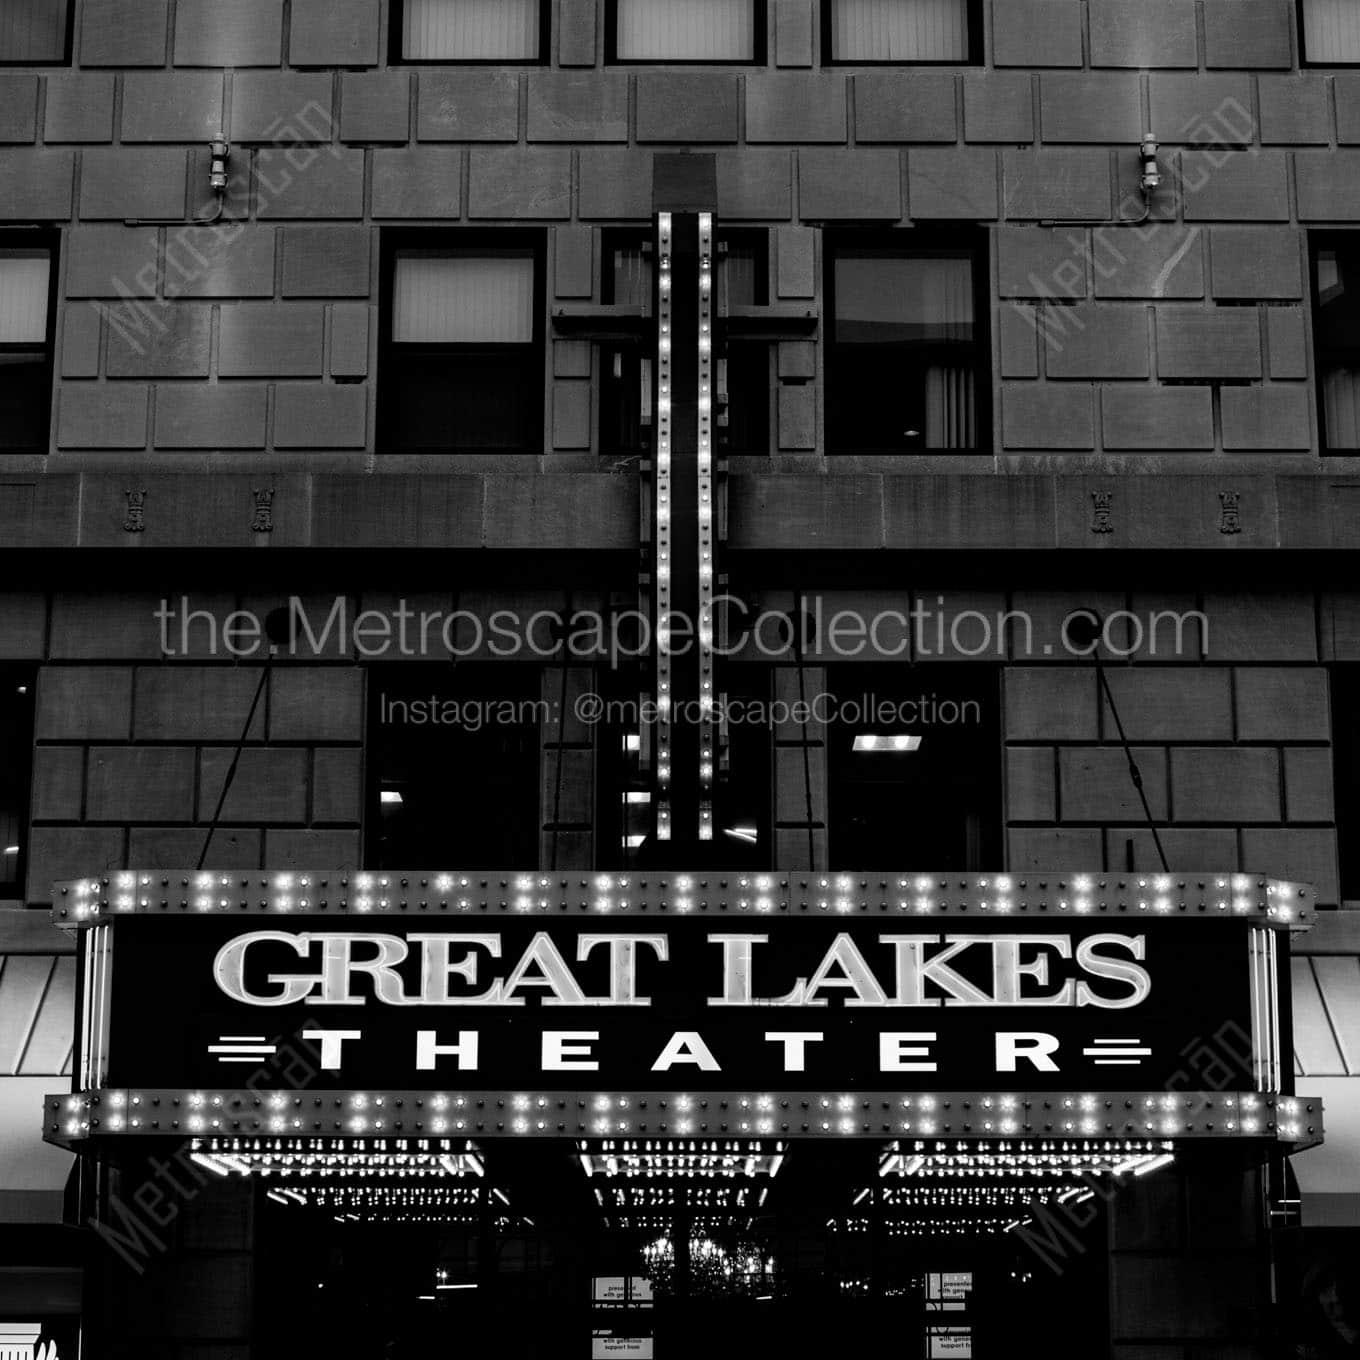 great lakes theater marquee Black & White Office Art